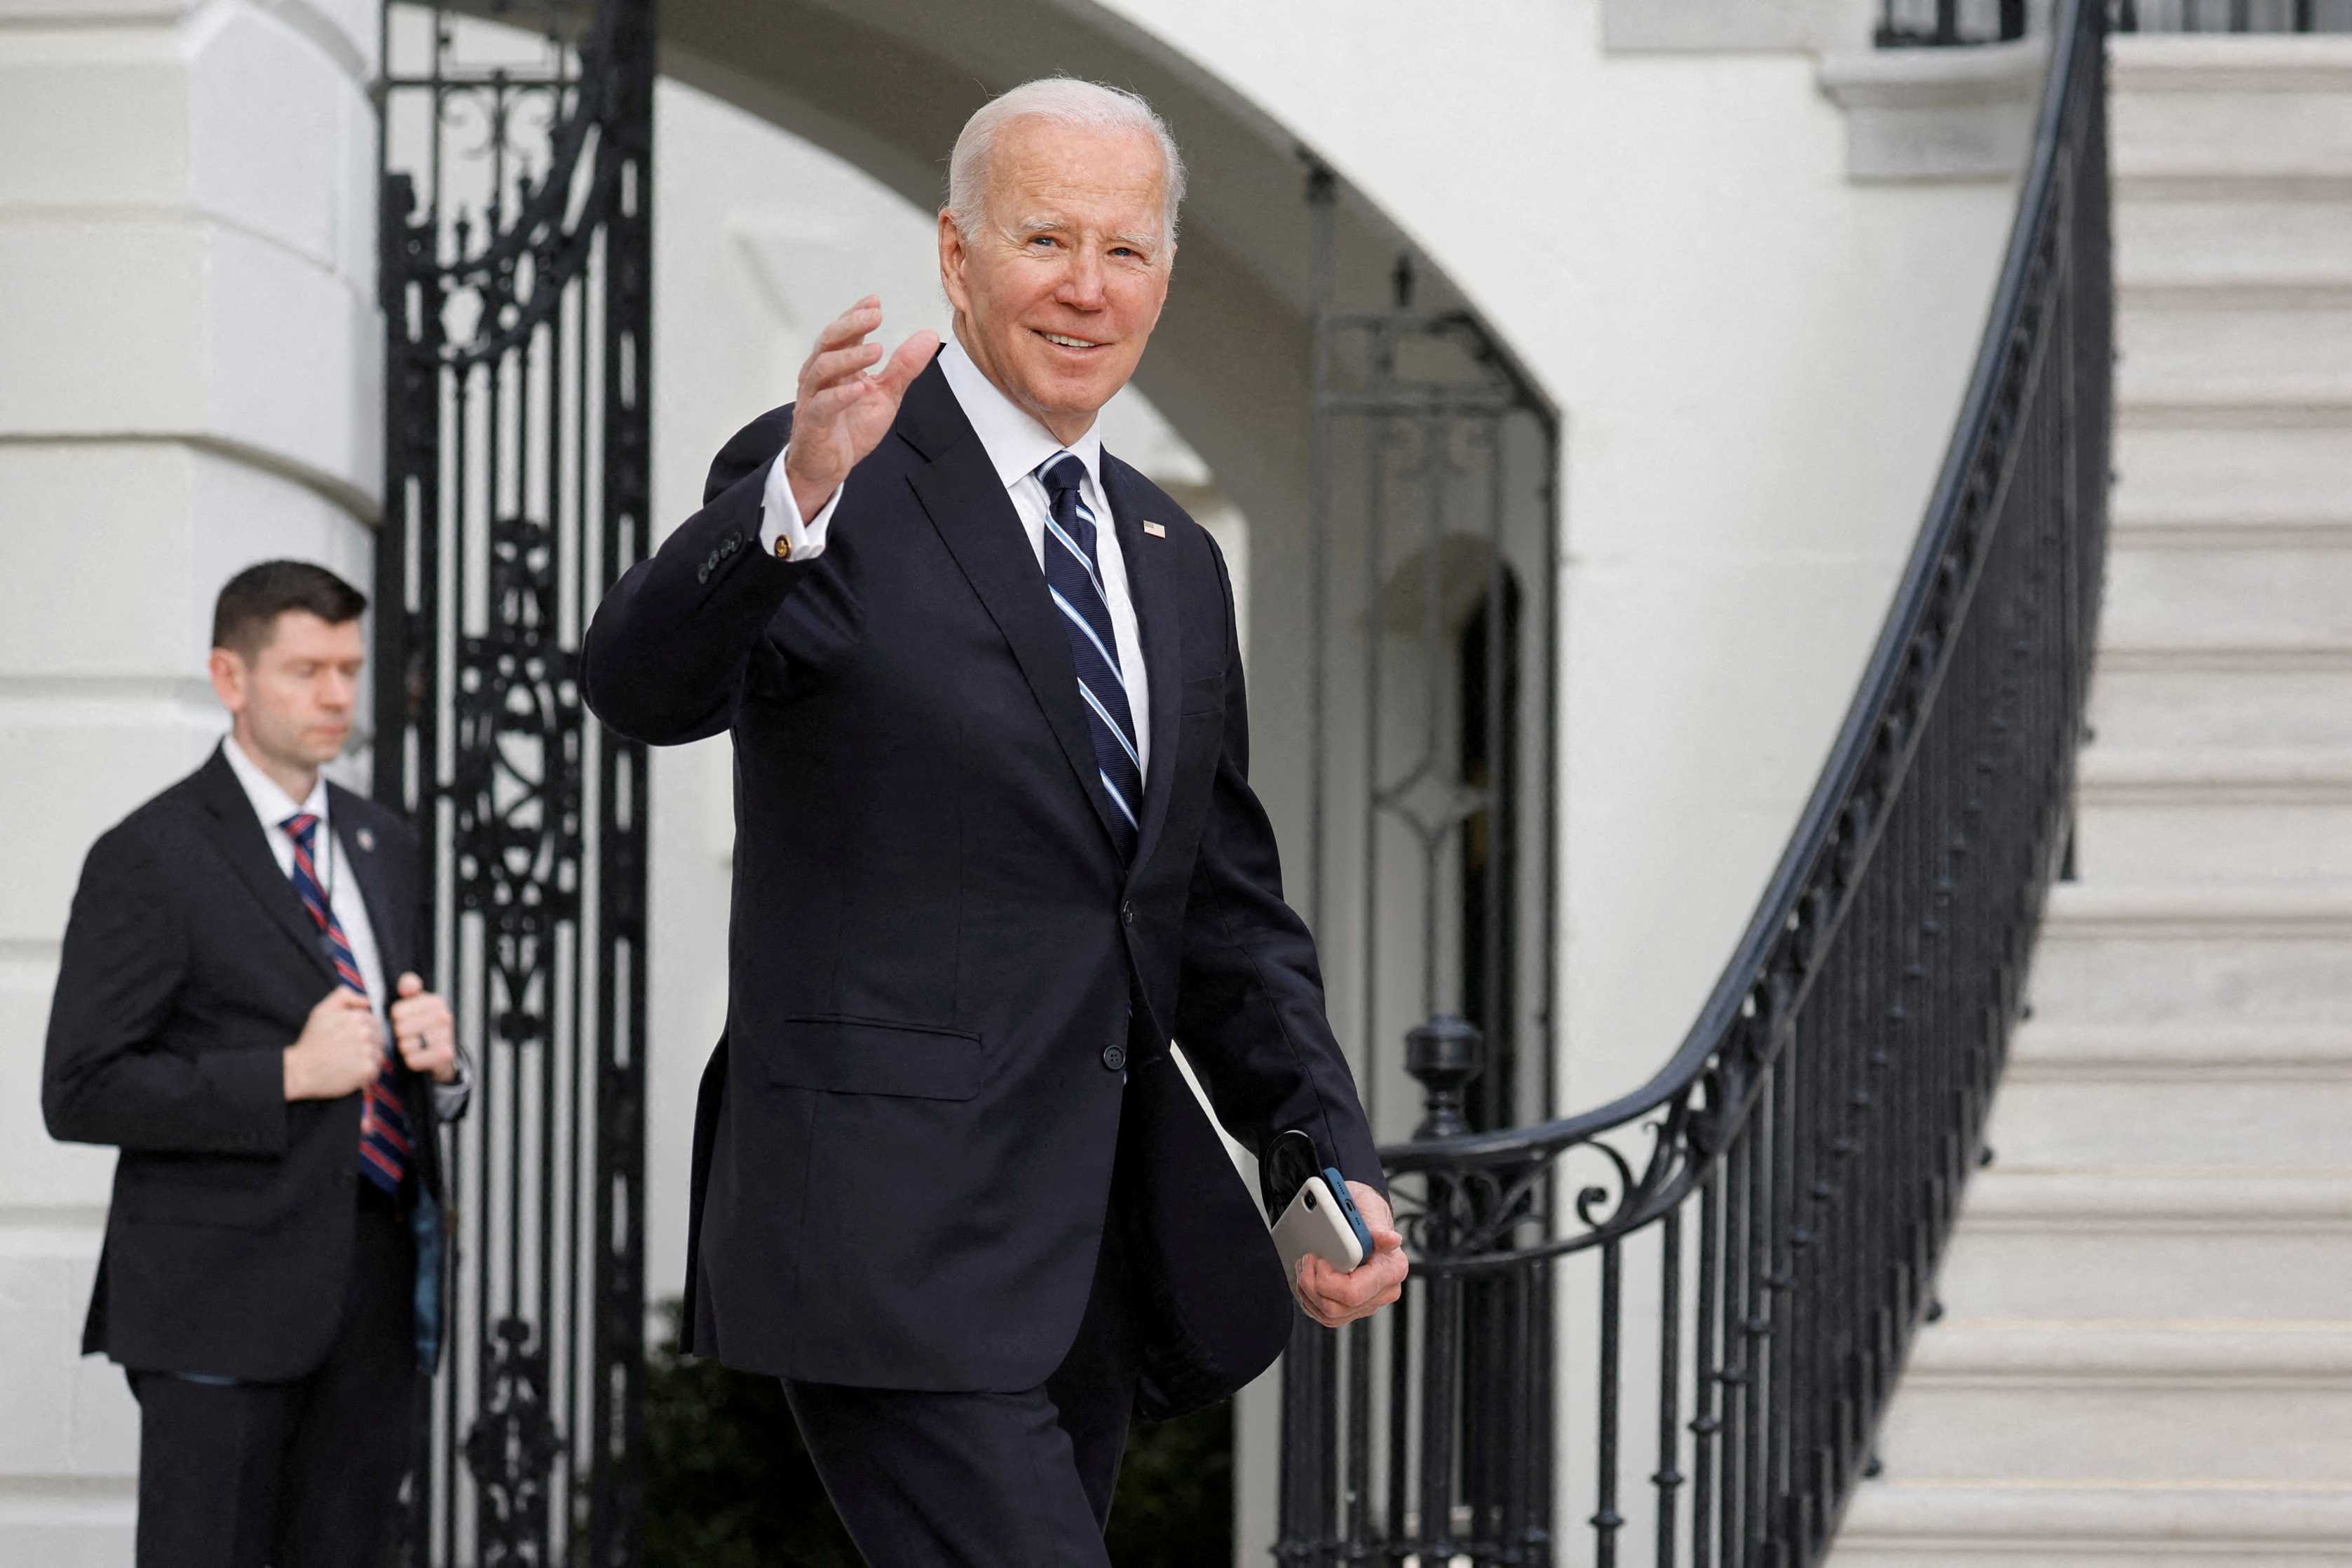 [WATCH] 'There's No "There" There,' President Biden Says of Documents Found at His Home